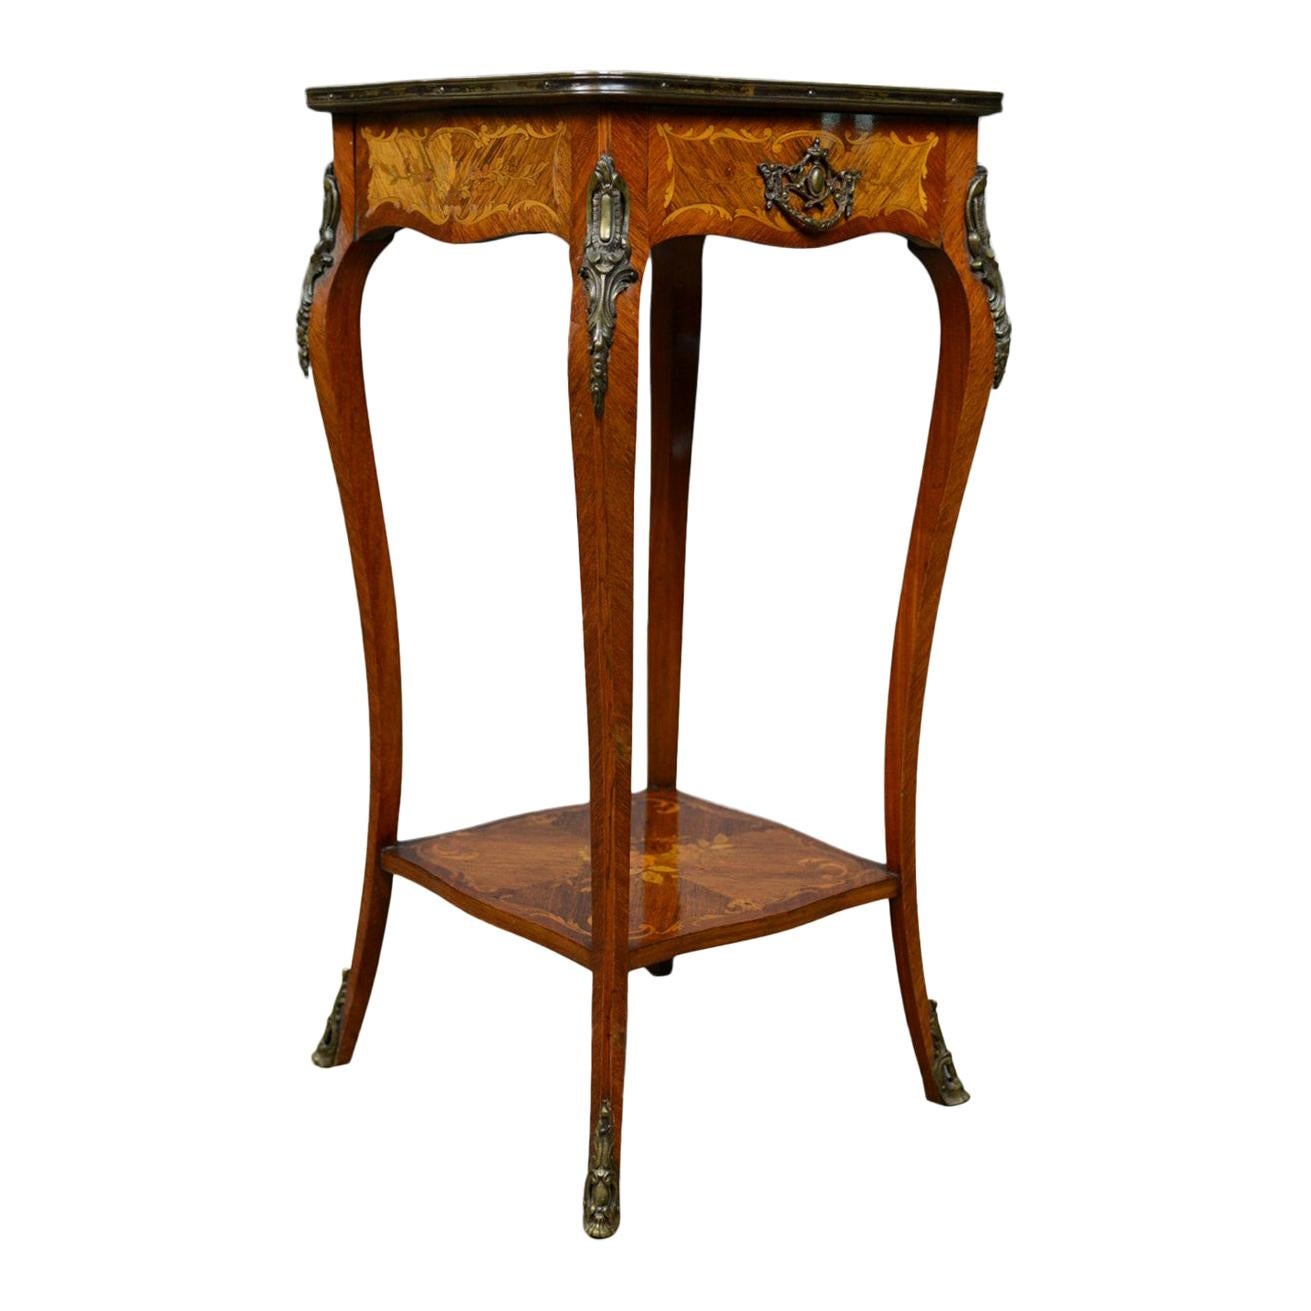 French Antique Étagère, Kingwood Side Table, Nightstand, Druce & Co., circa 1870